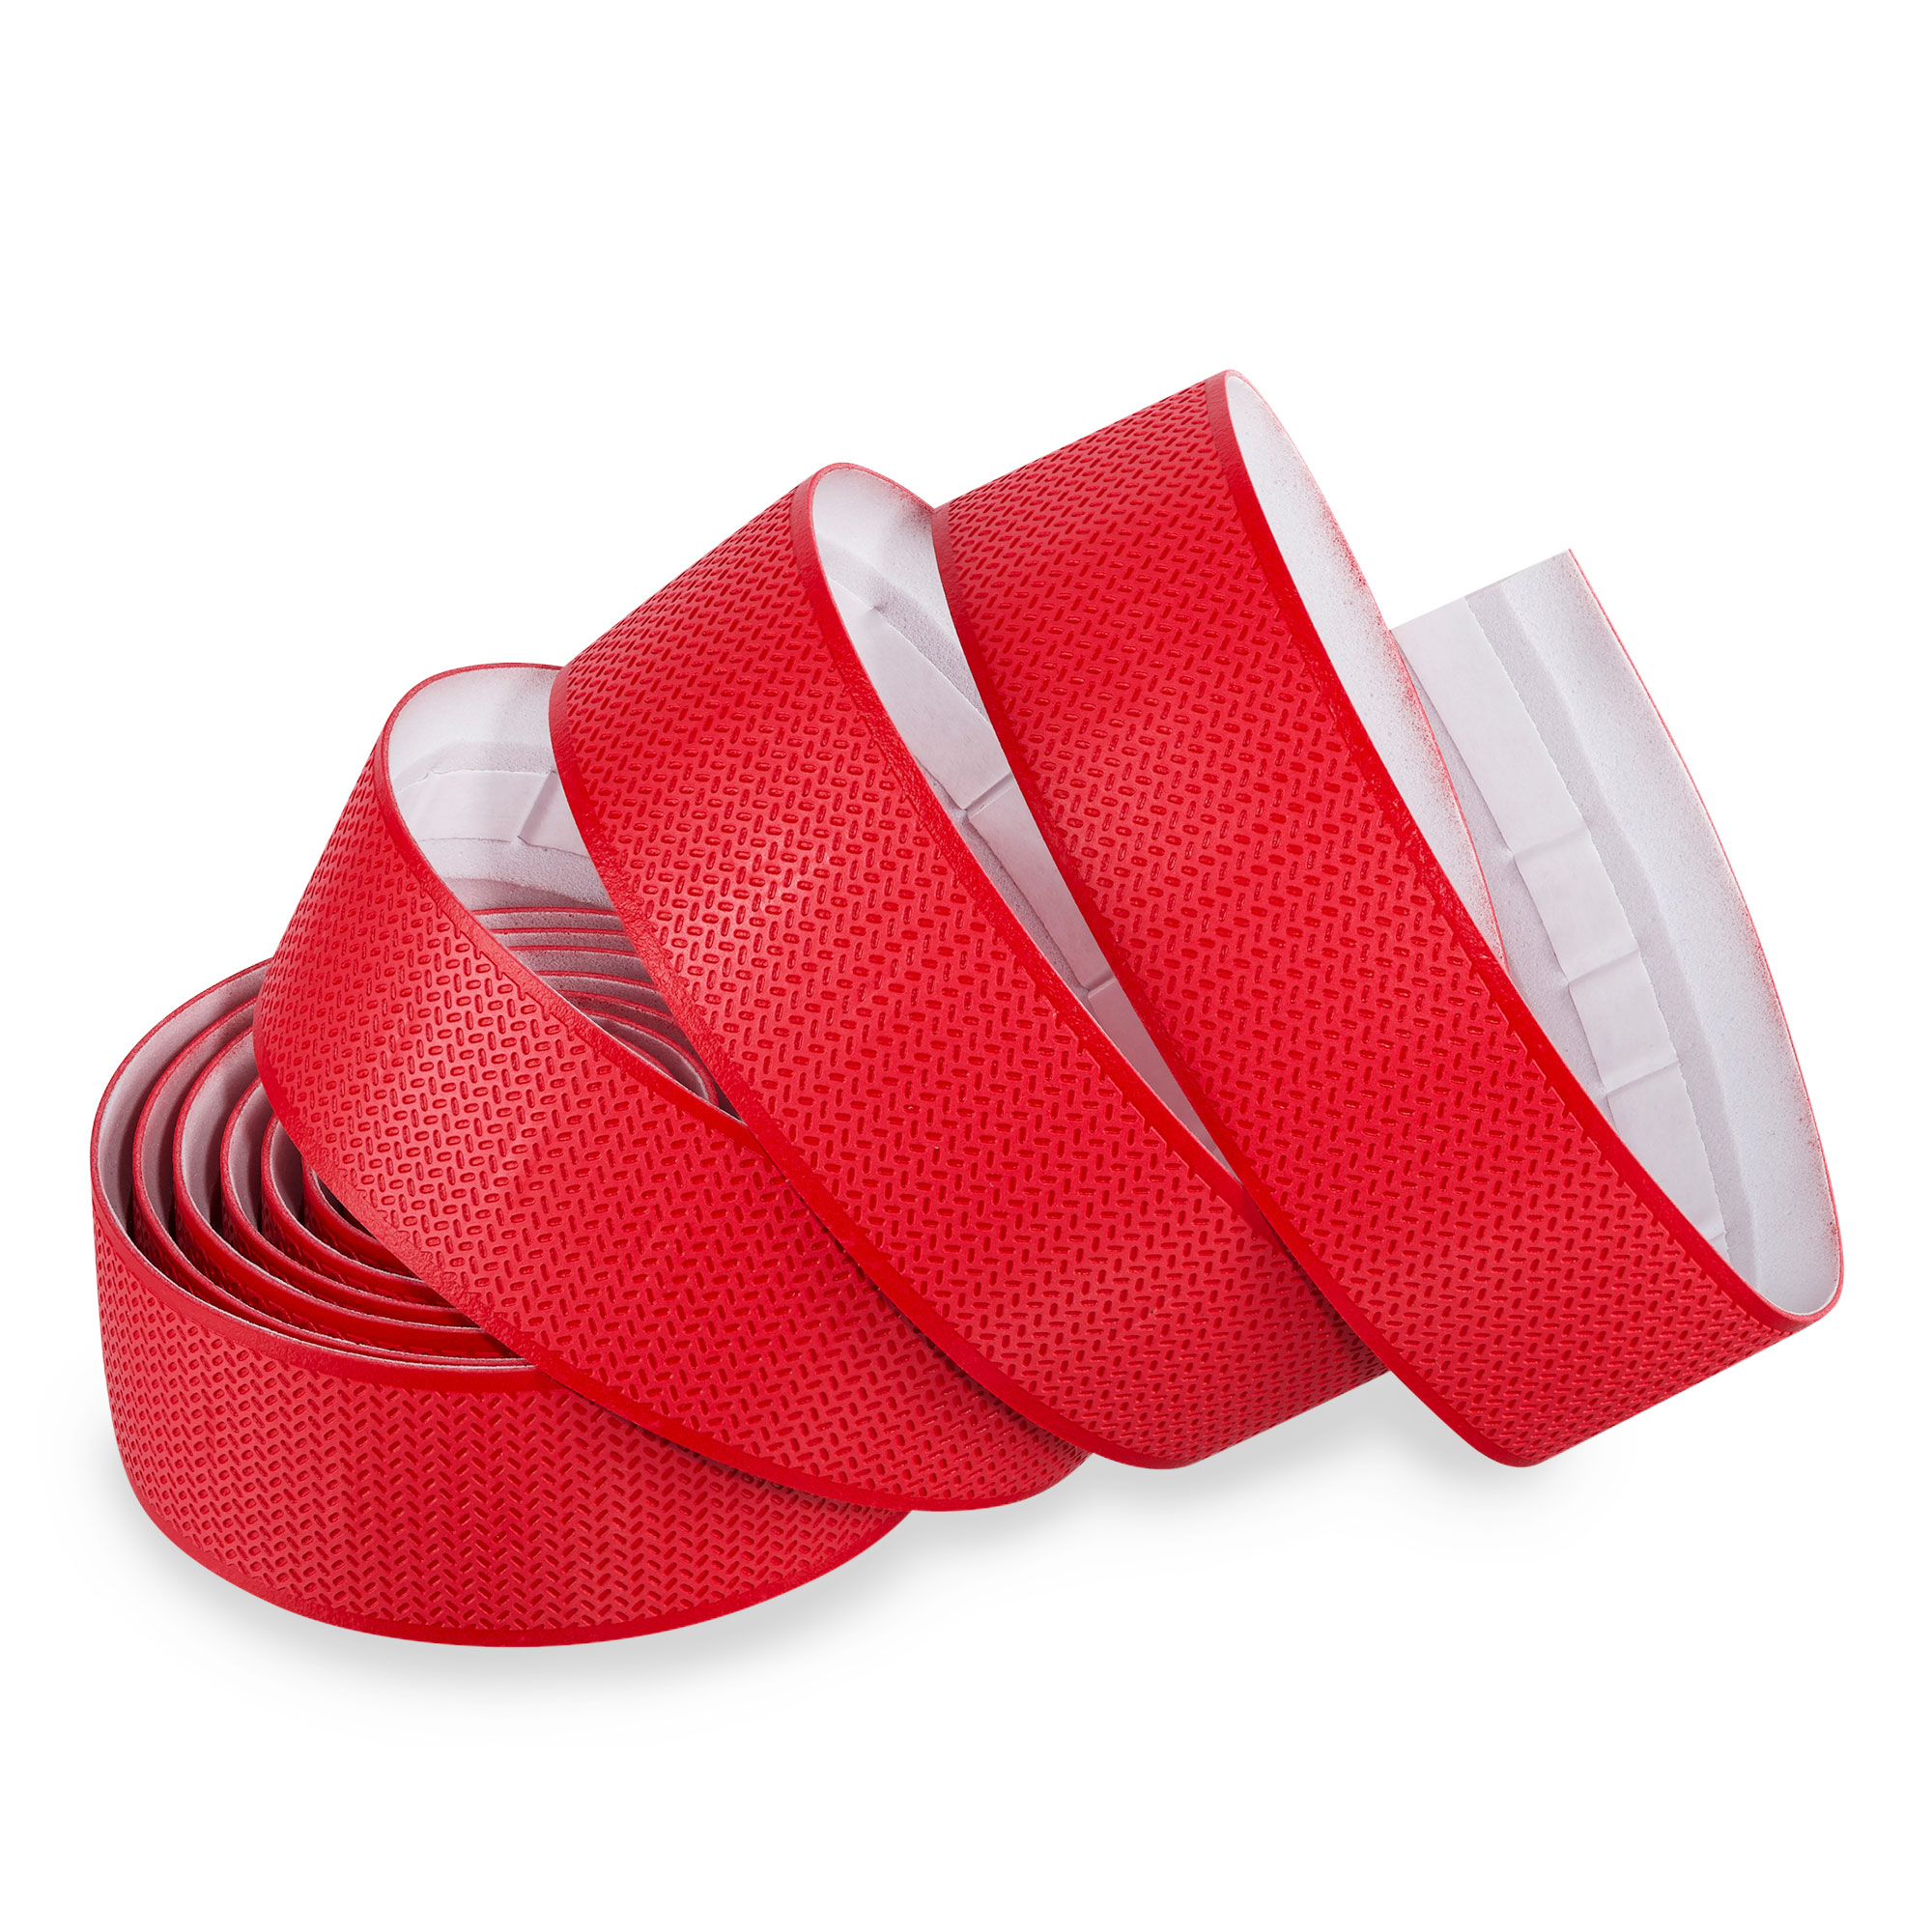 DXC BT Bar Tape - Dual Color - Red